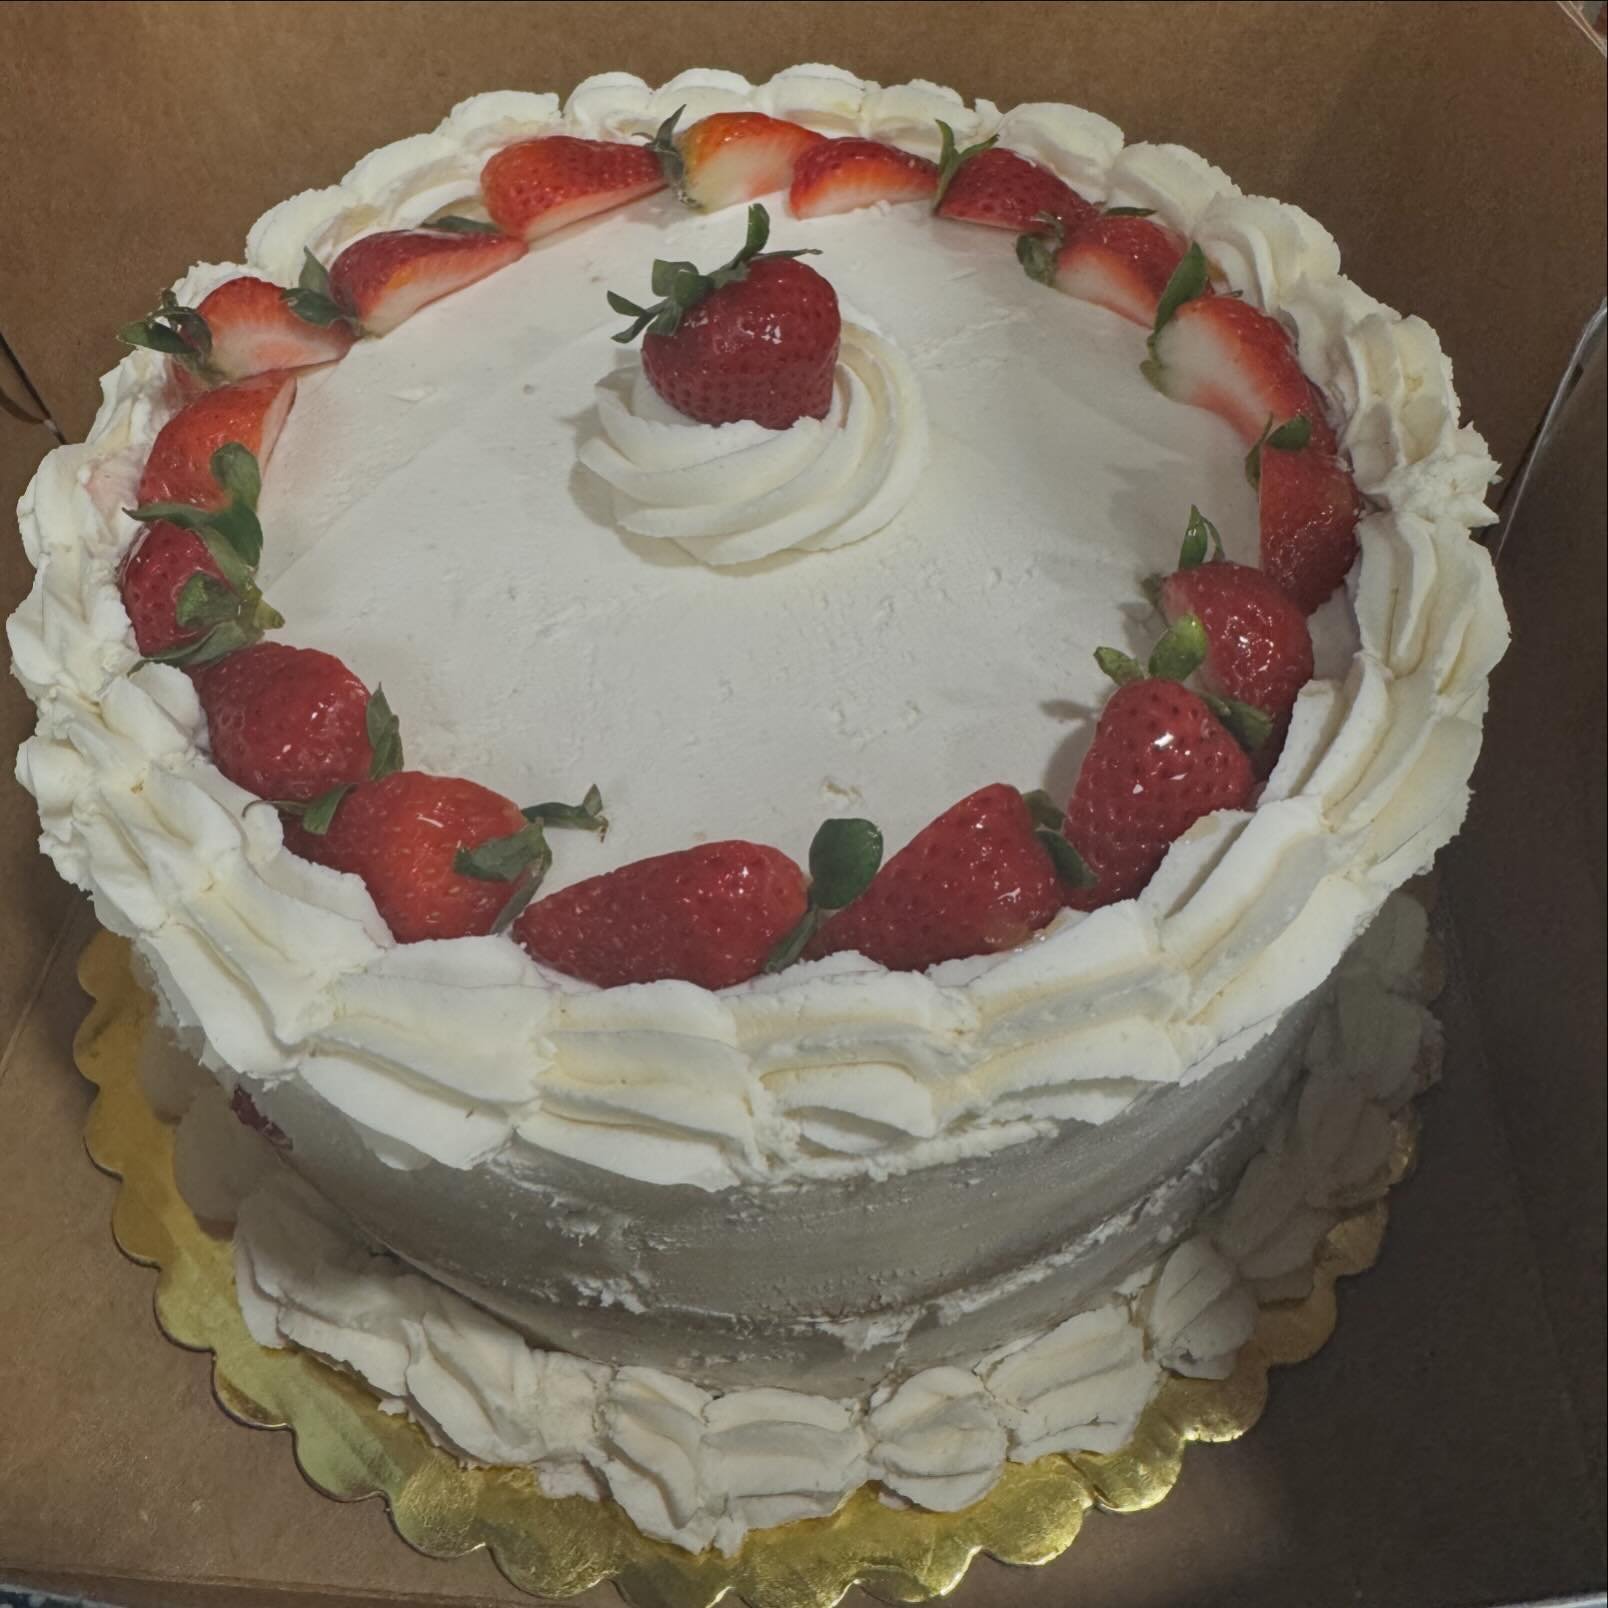 A pretty strawberry shortcake for a special birthday! We are working behind the scenes to streamline a special order process- we&rsquo;re very behind on emails and this new page will make things so much easier for you! Hopefully it&rsquo;ll be up in 